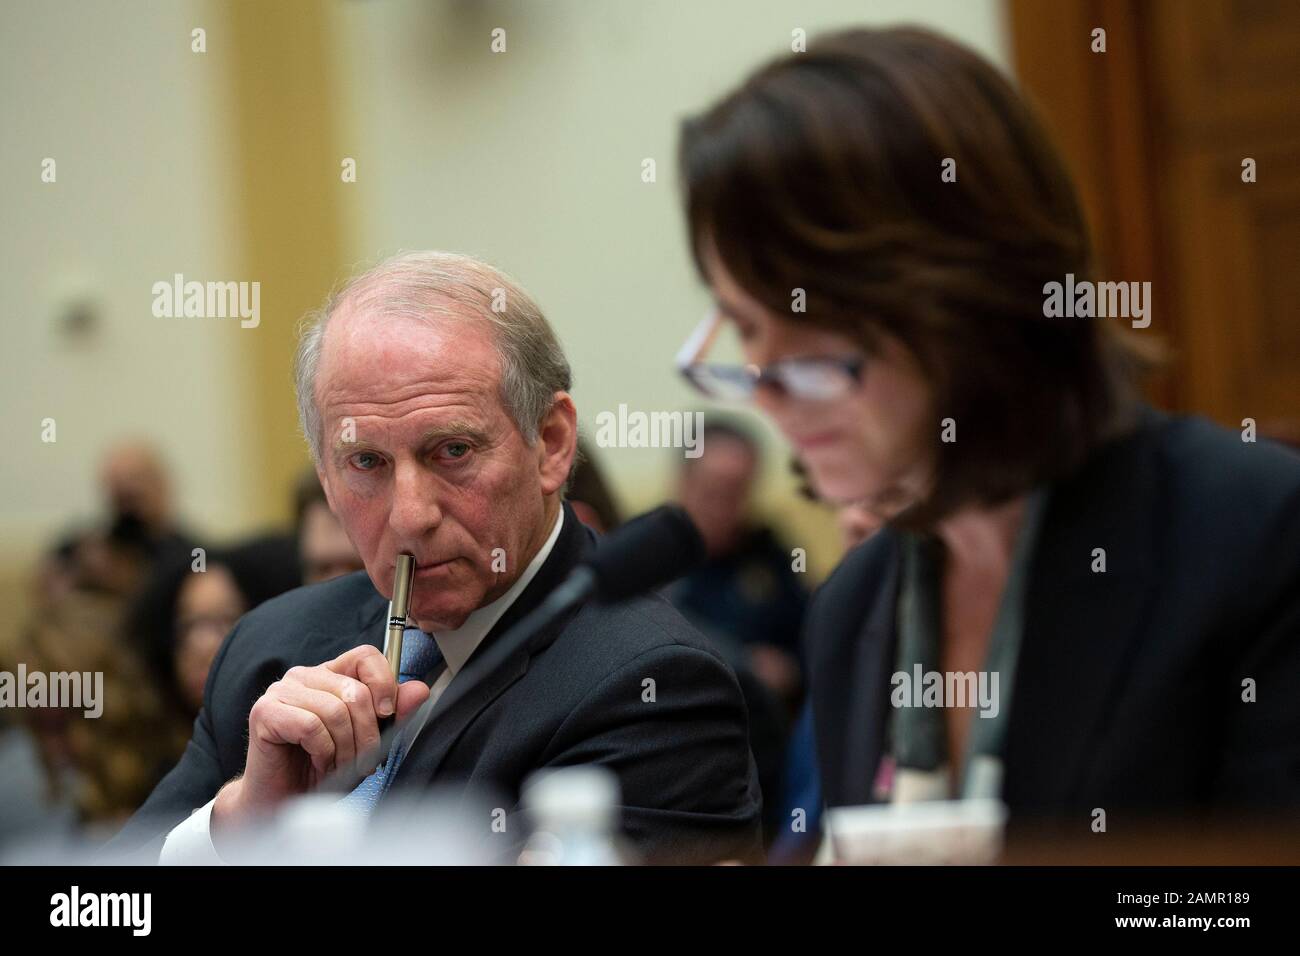 Richard Haass Ph.D., President of the Council on Foreign Relations, Avril Haines, Former Deputy National Security Advisor and Former Deputy Director of the Central Intelligence Agency, and Stephen J. Hadley, Former National Security Advisor, testify before the U.S. House Committee on Foreign Relations at the United States Capitol in Washington D.C., U.S., on Tuesday, January 14, 2020, following a U.S., drone strike that killed Iranian military leader Qasem Soleimani on January 3, 2020.  United States Secretary of State Mike Pompeo, who was supposed to be the key witness appearing before the co Stock Photo